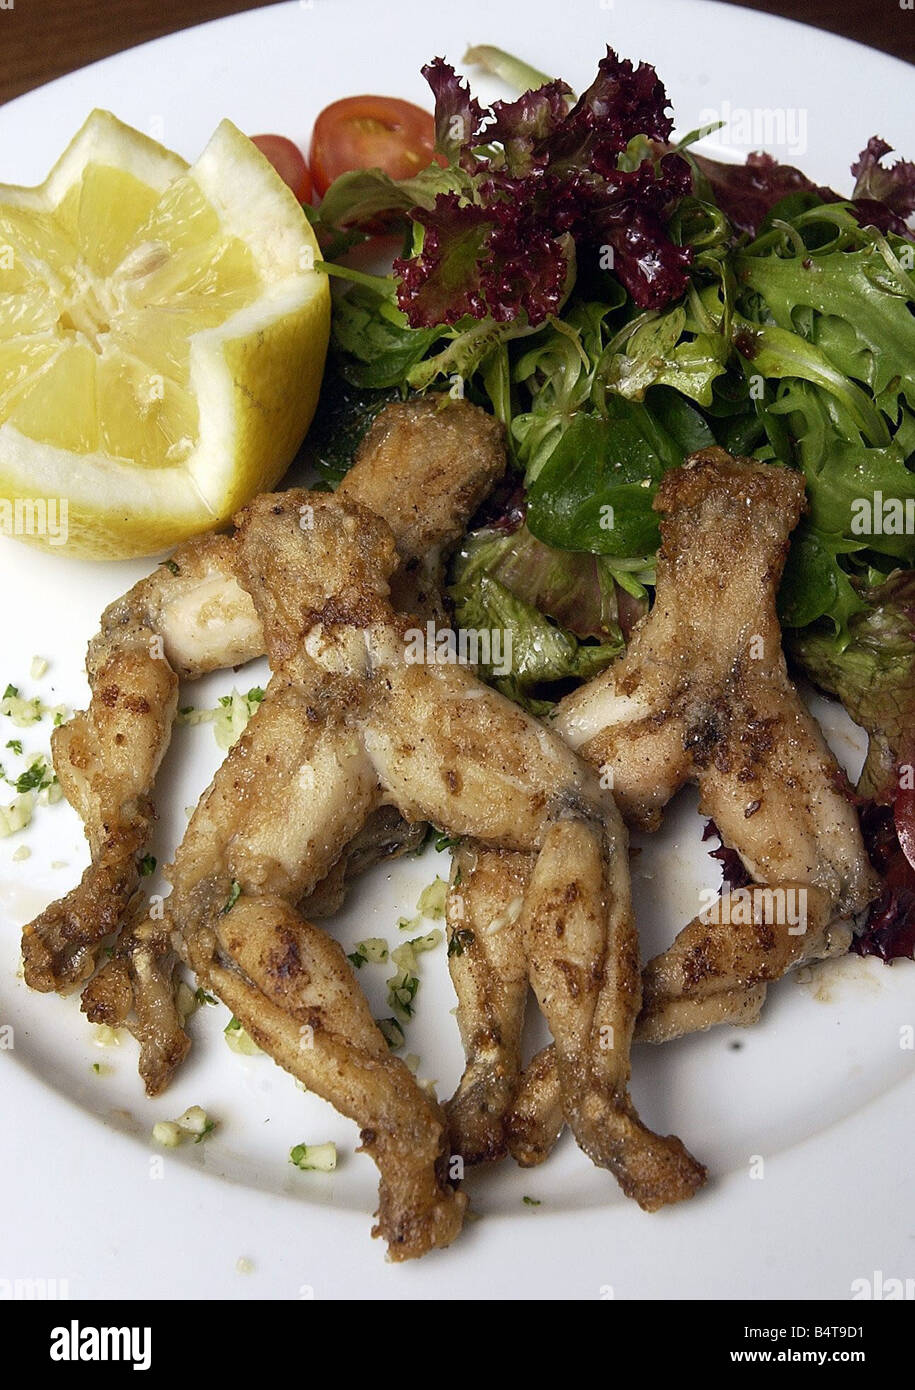 Fried Frog-Leg In Dish On White Background Stock Photo, Picture And Royalty  Free Image